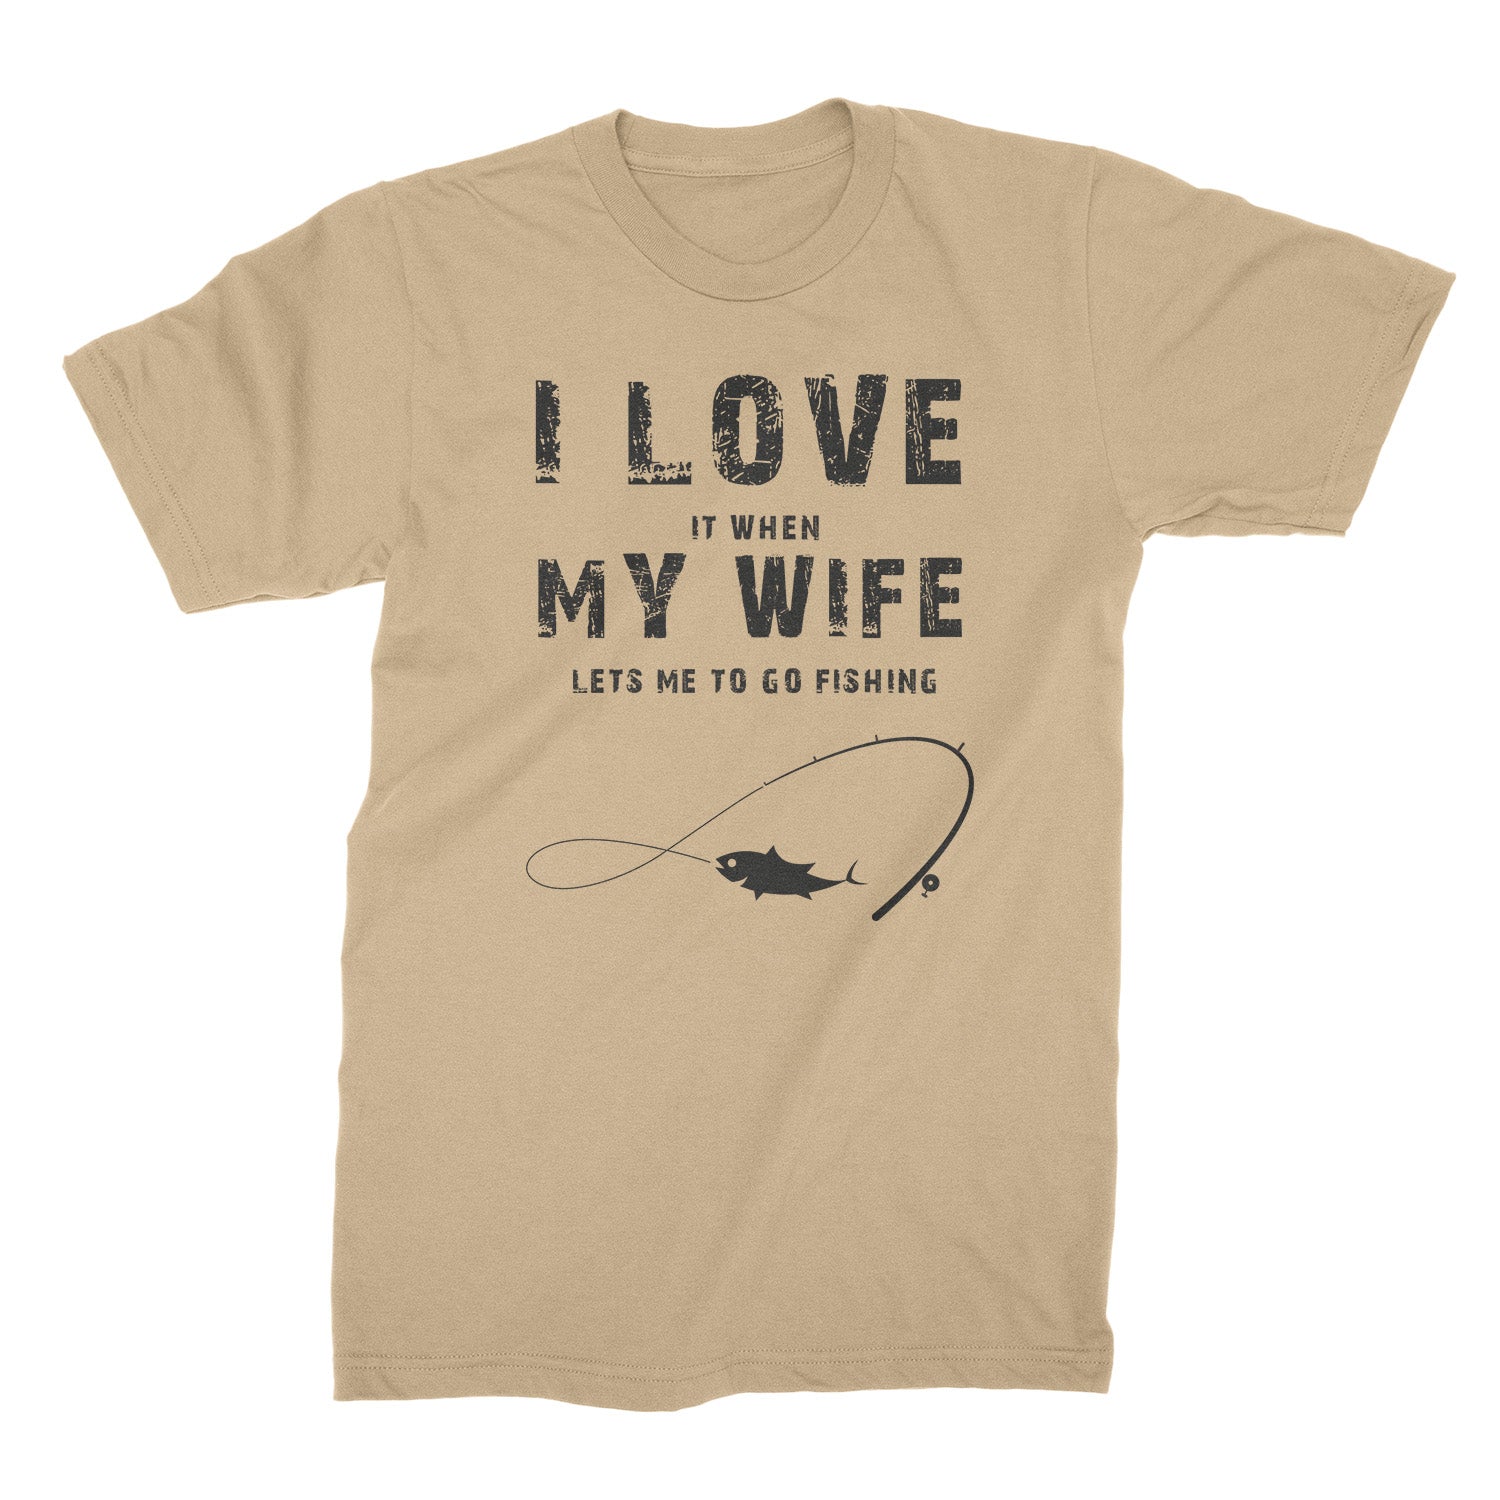 I Love It When My Wife Lets Me Go Fishing Shirt Funny Fisherman